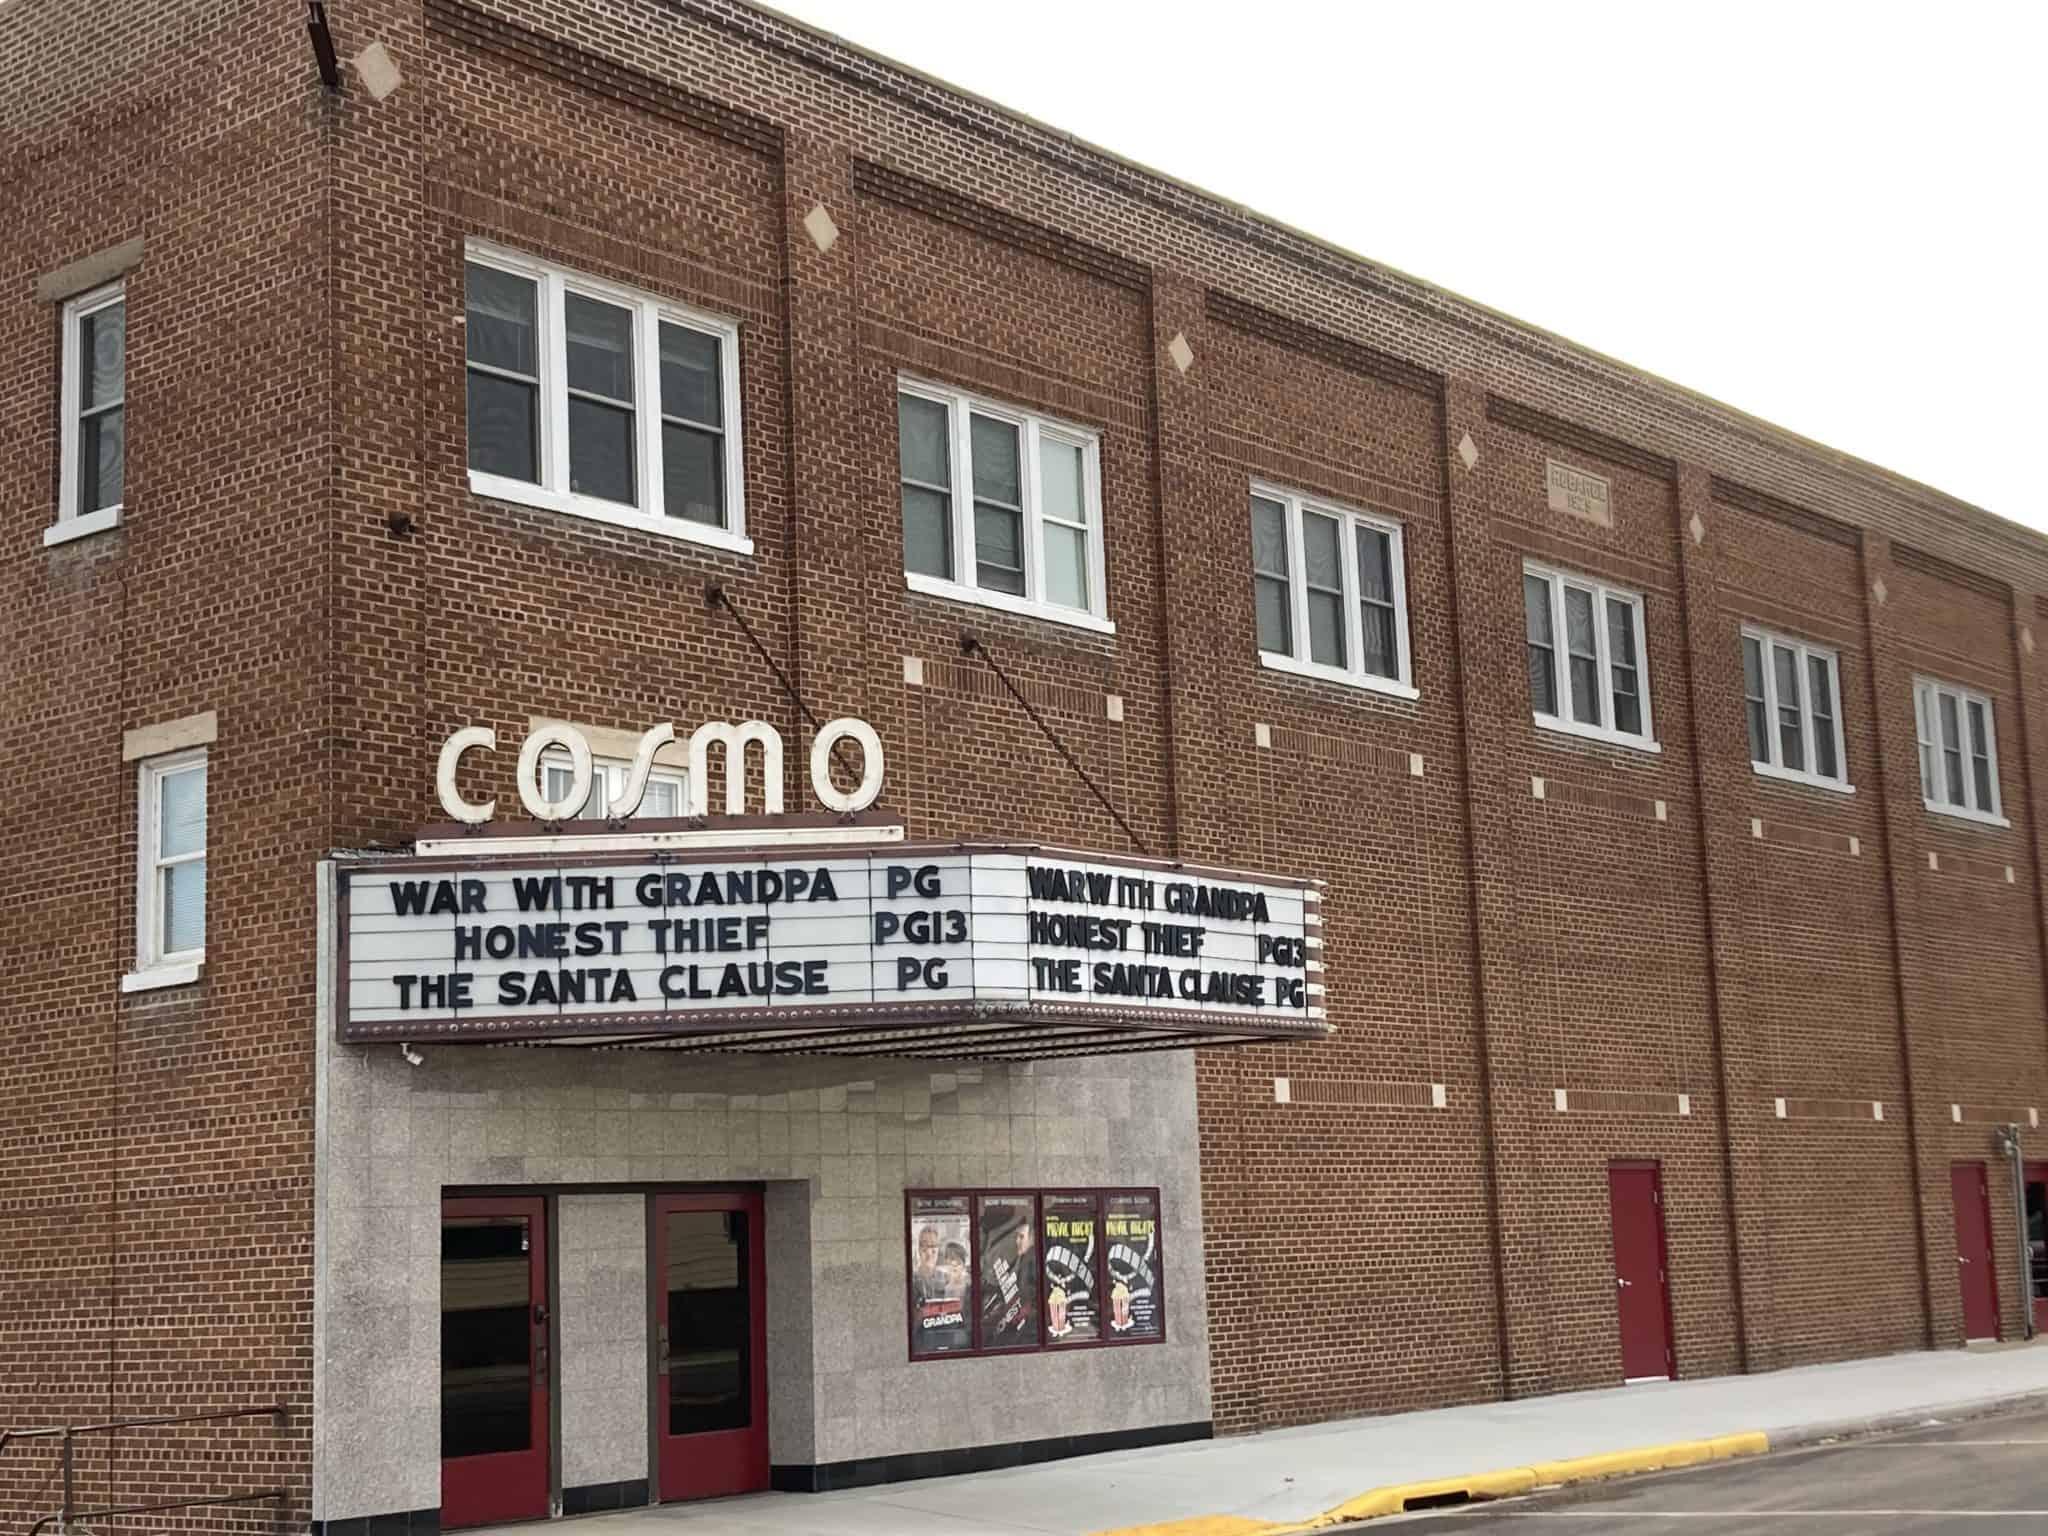 Cosmo Theatre in Merrill among recipients of state COVID-19 Theater Grants